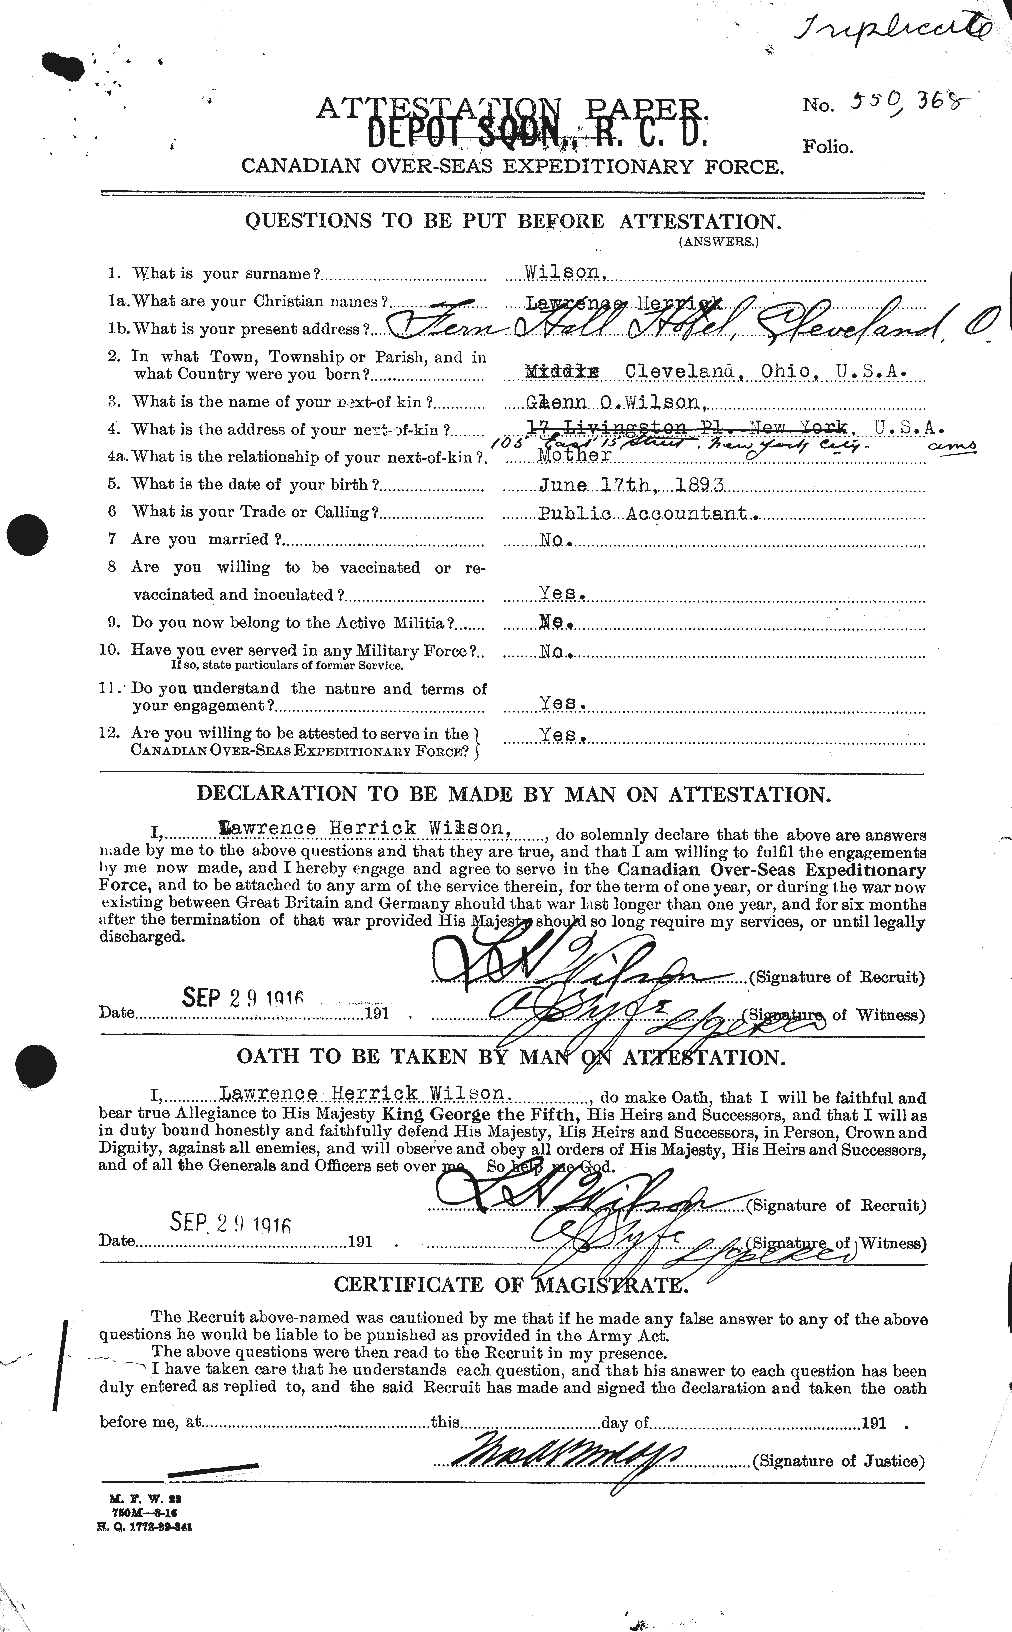 Personnel Records of the First World War - CEF 678622a